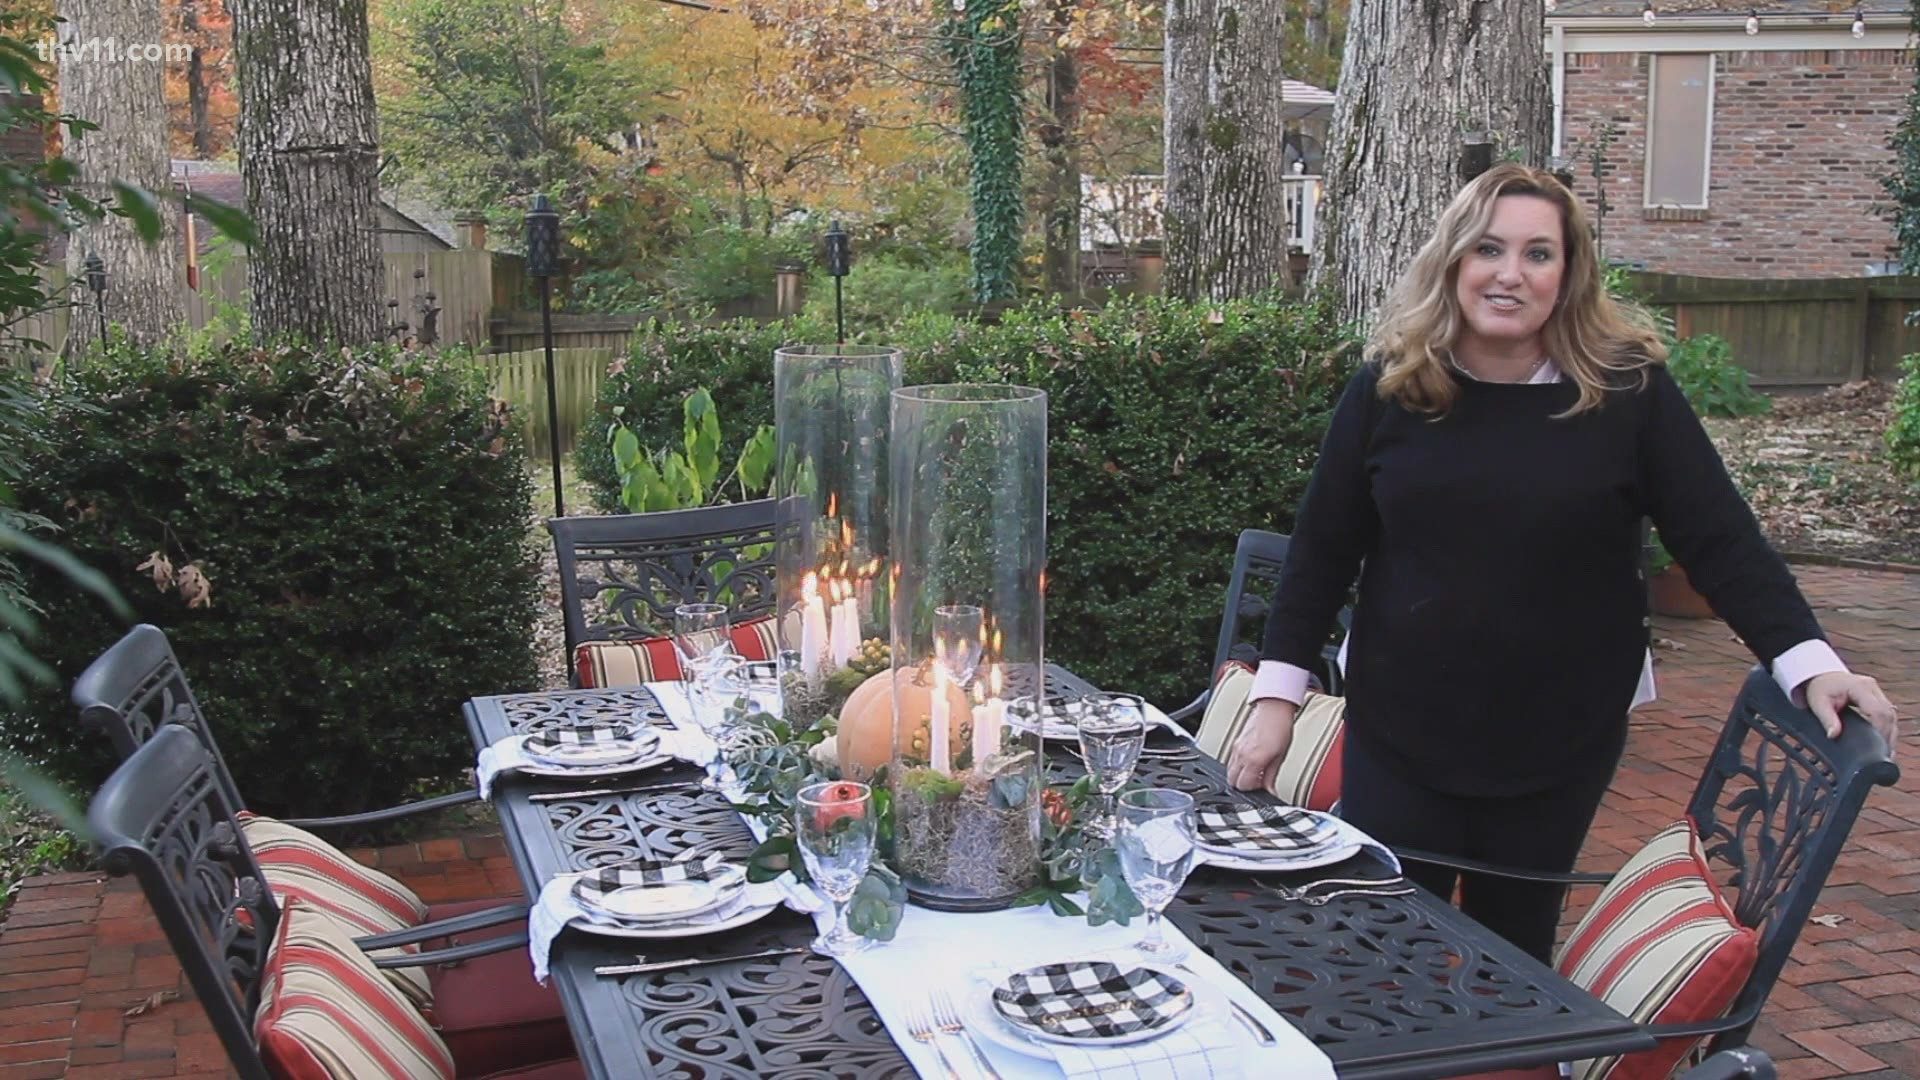 Mandy Shoptaw with Come on to My House shares some new ideas for a simple and intimate Thanksgiving this year.